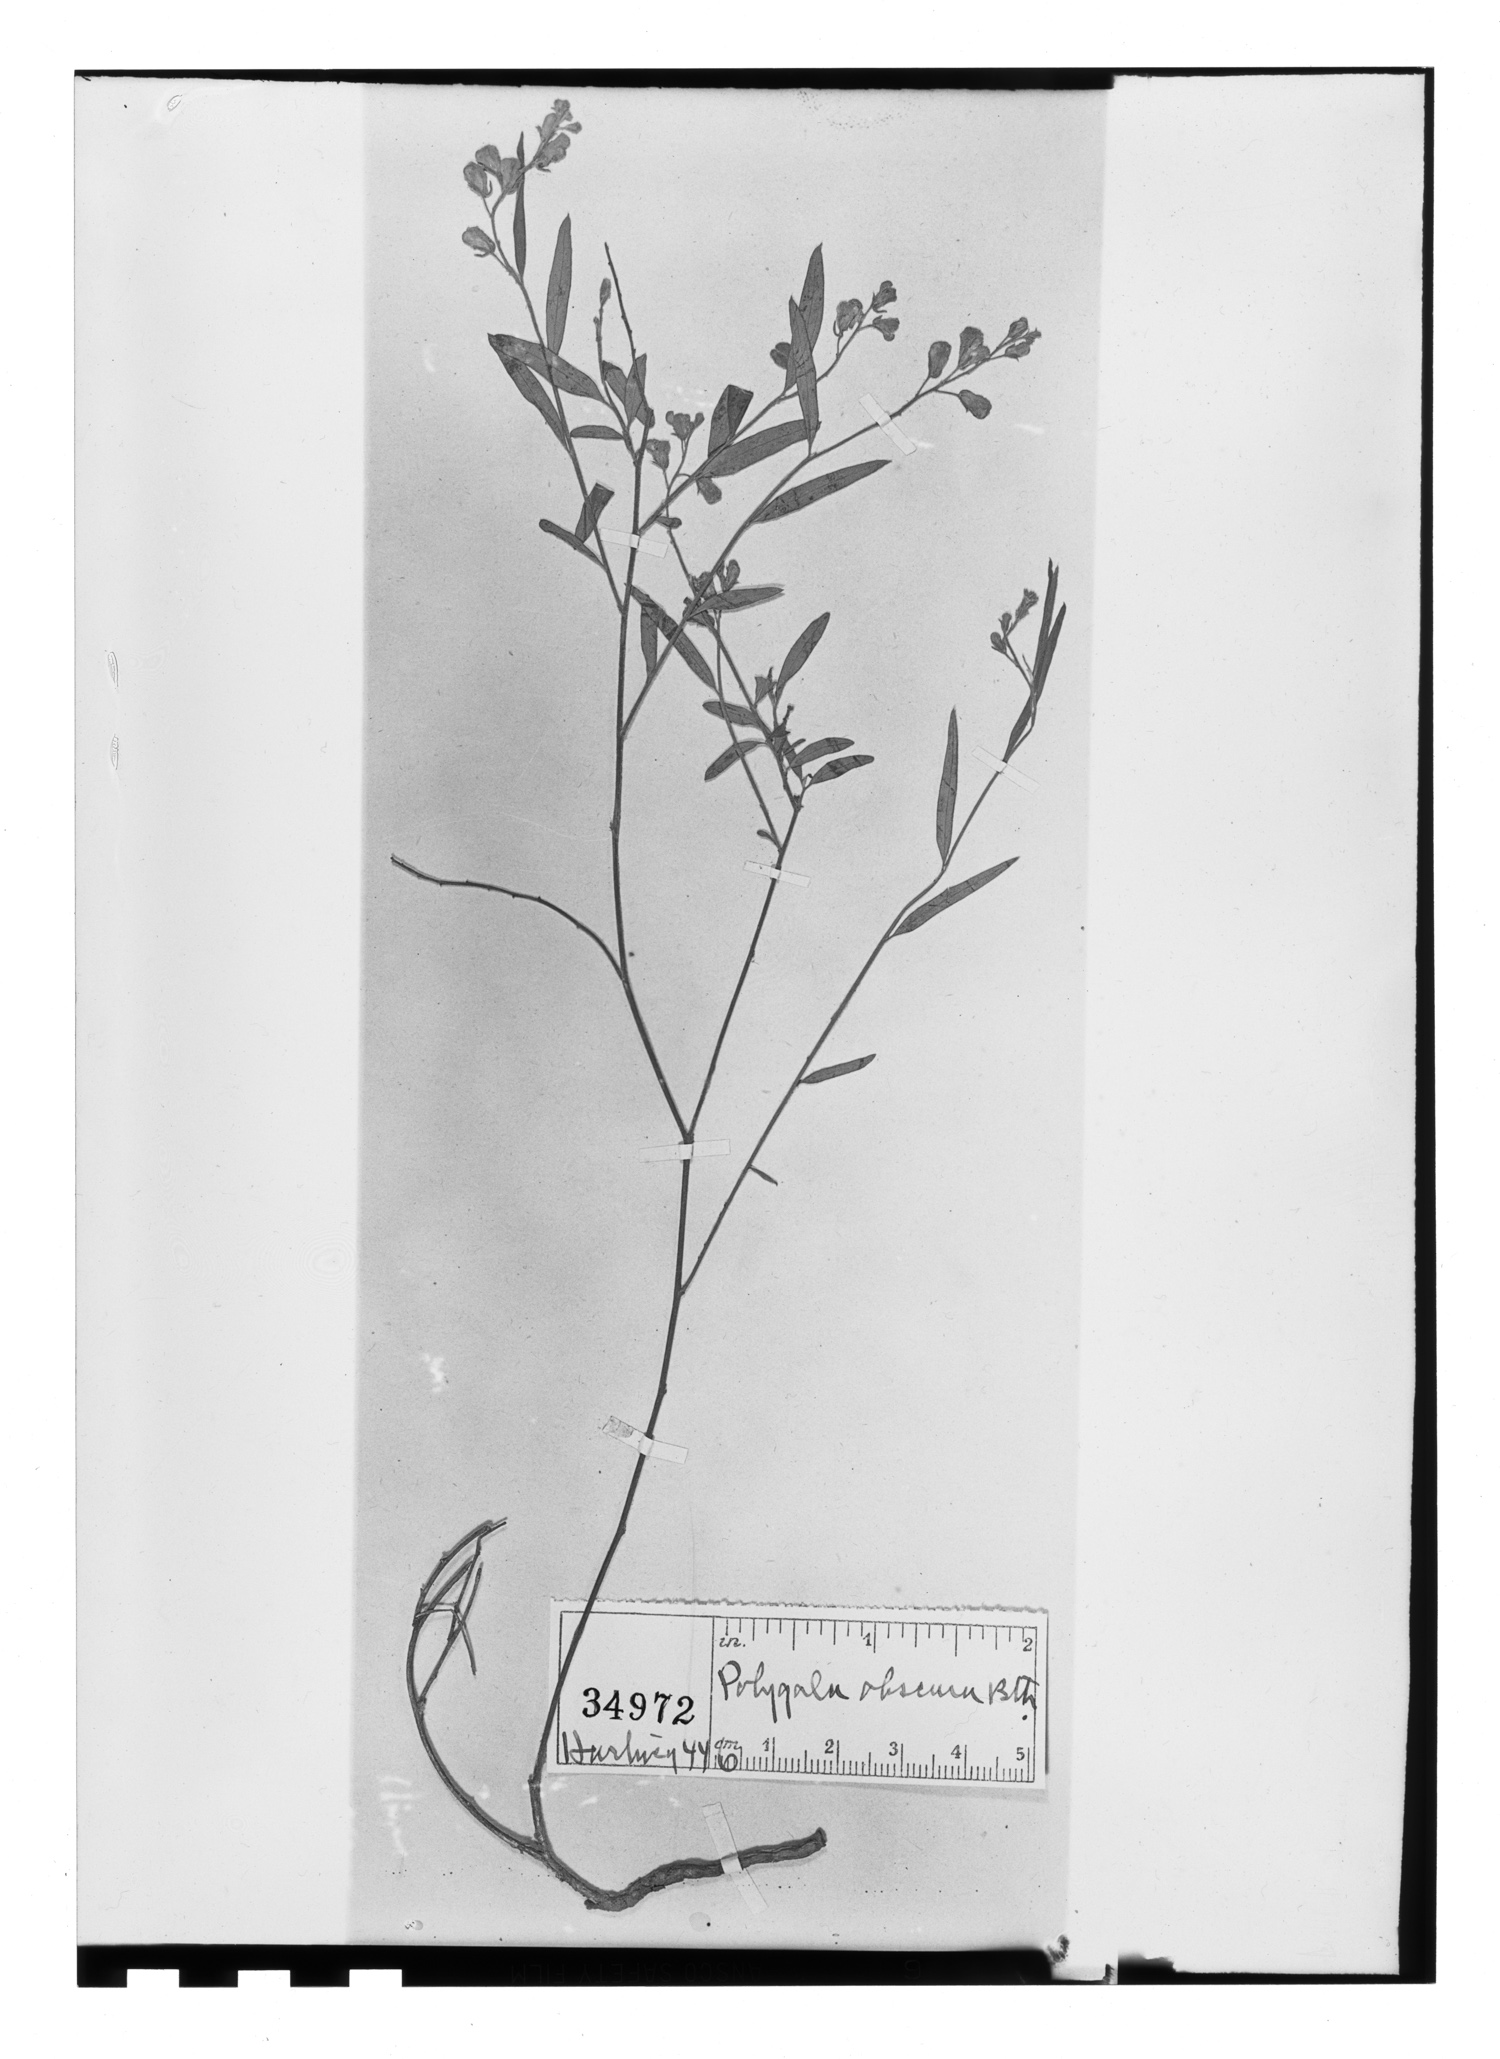 Polygala obscura image